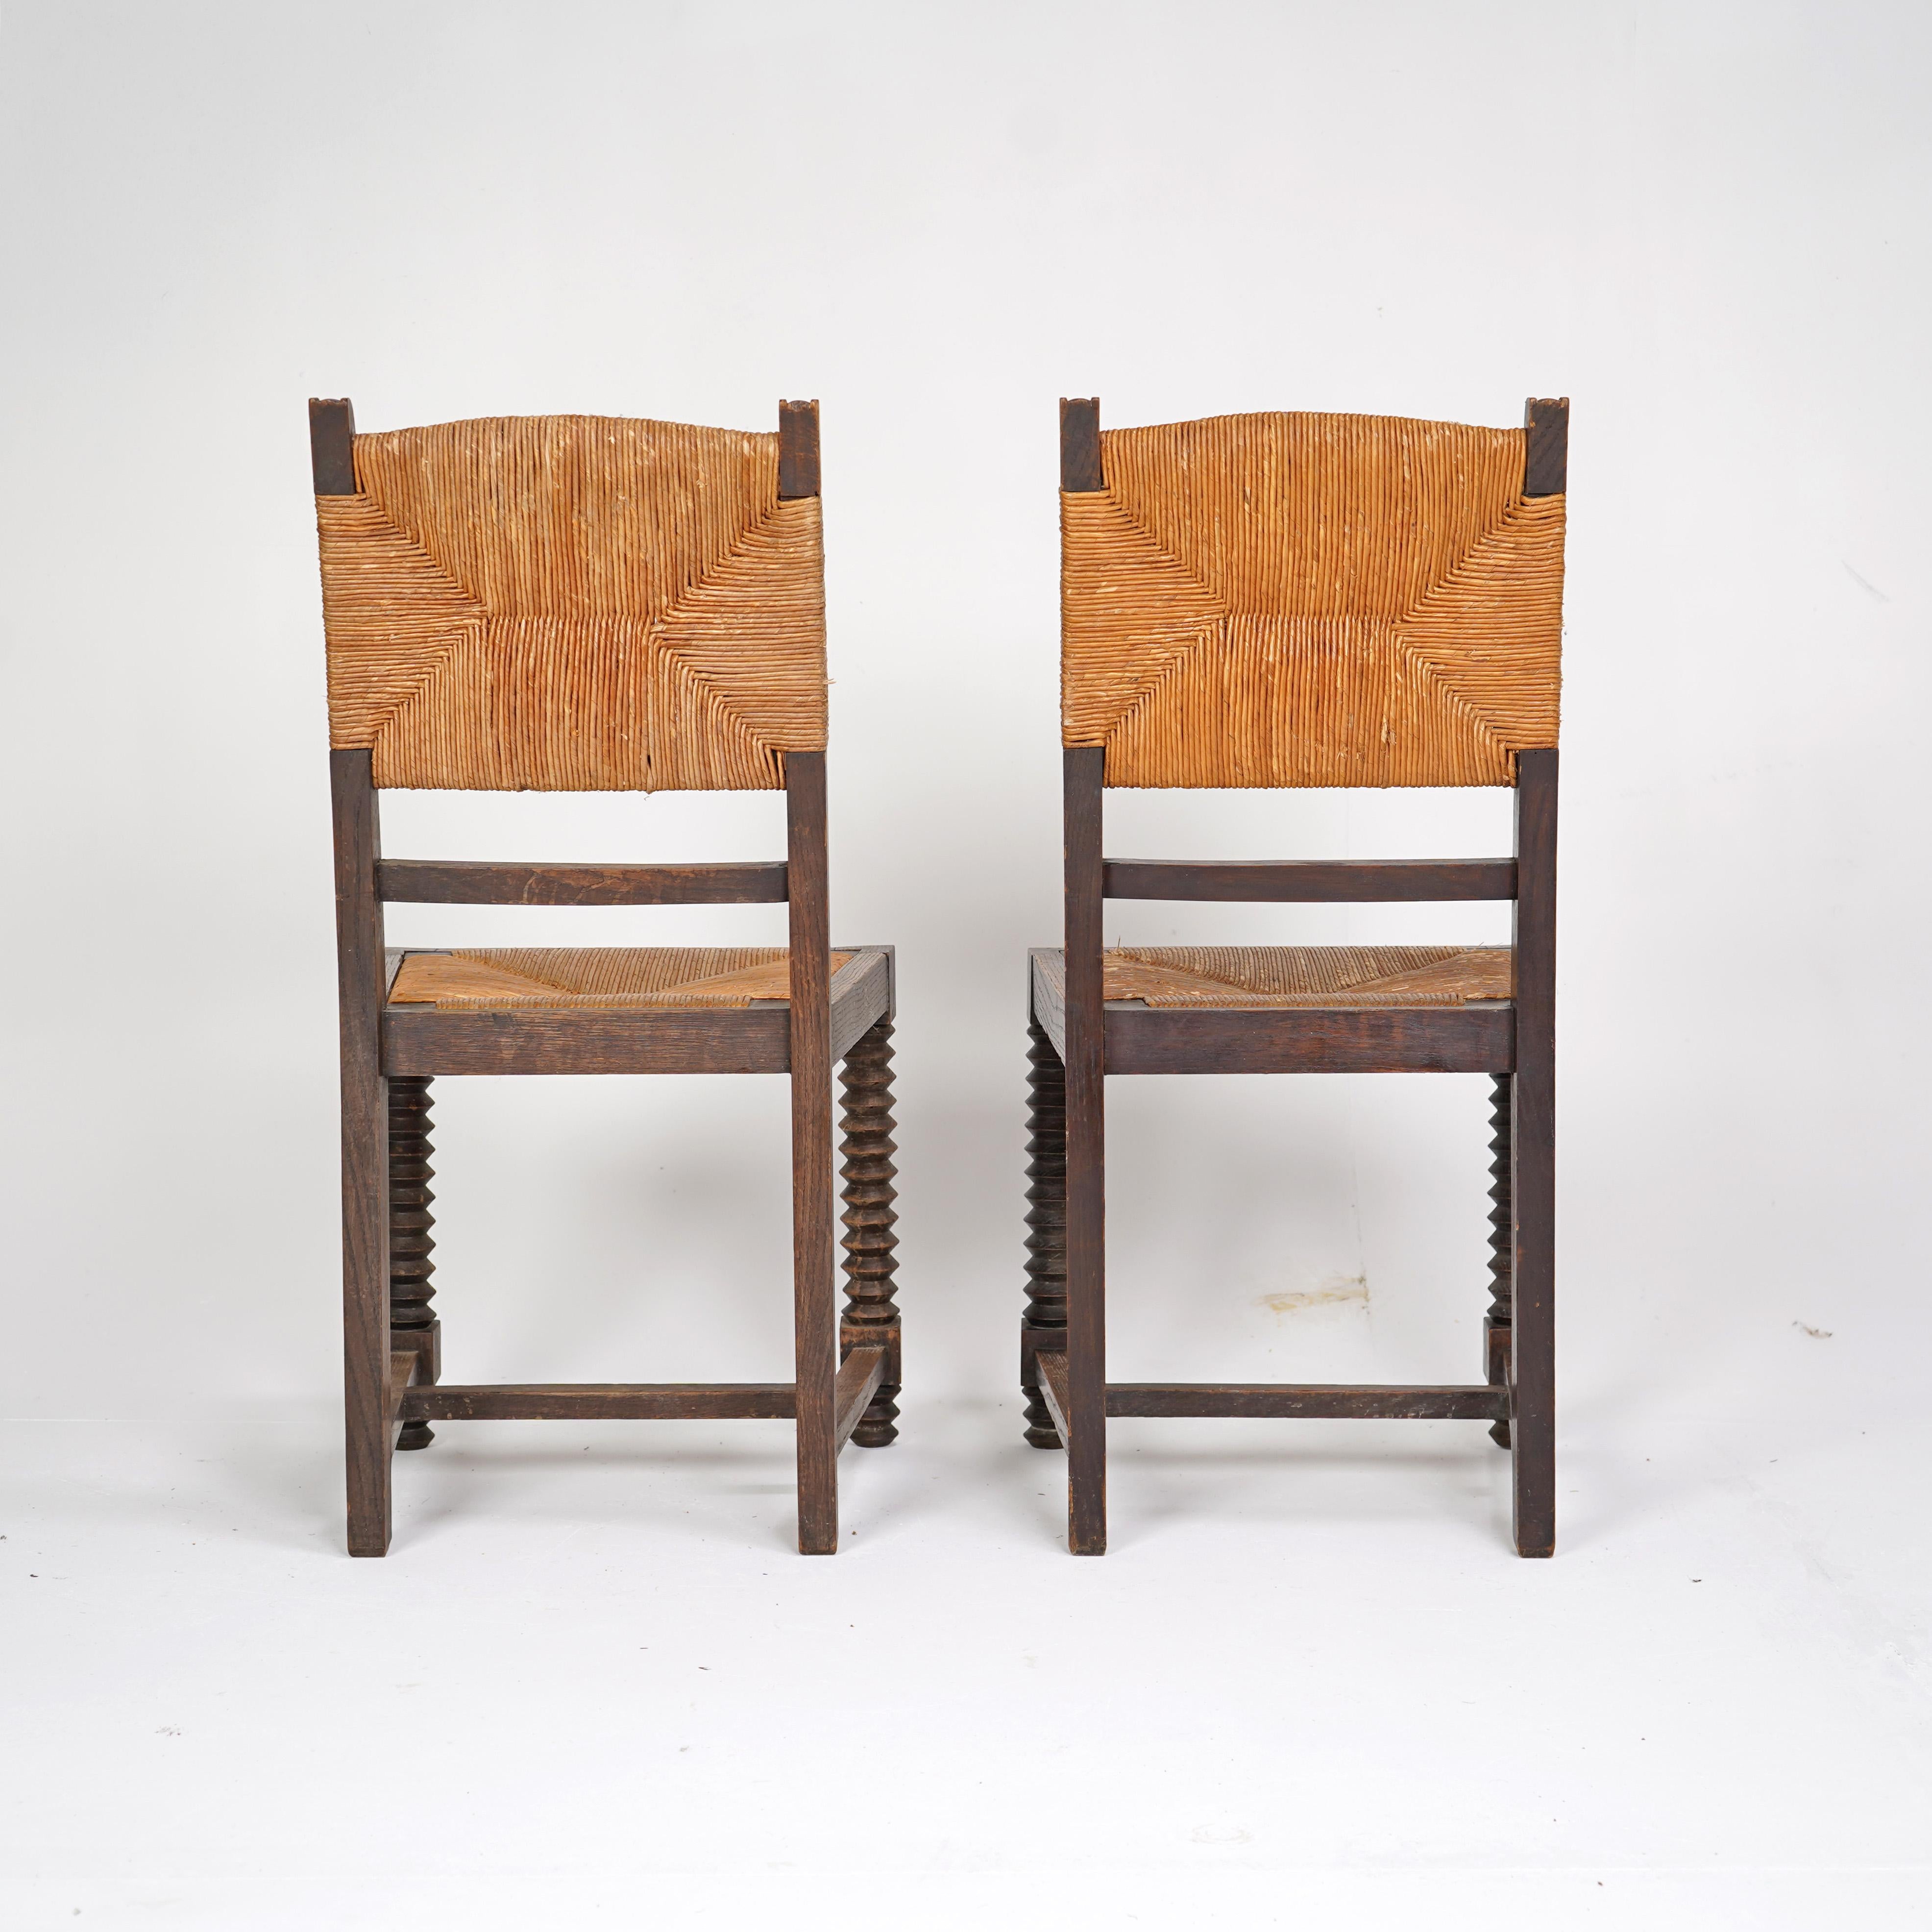 Pair Of French Charles Dudouyt Style Chairs - Wooden with Rush Seat For Sale 1